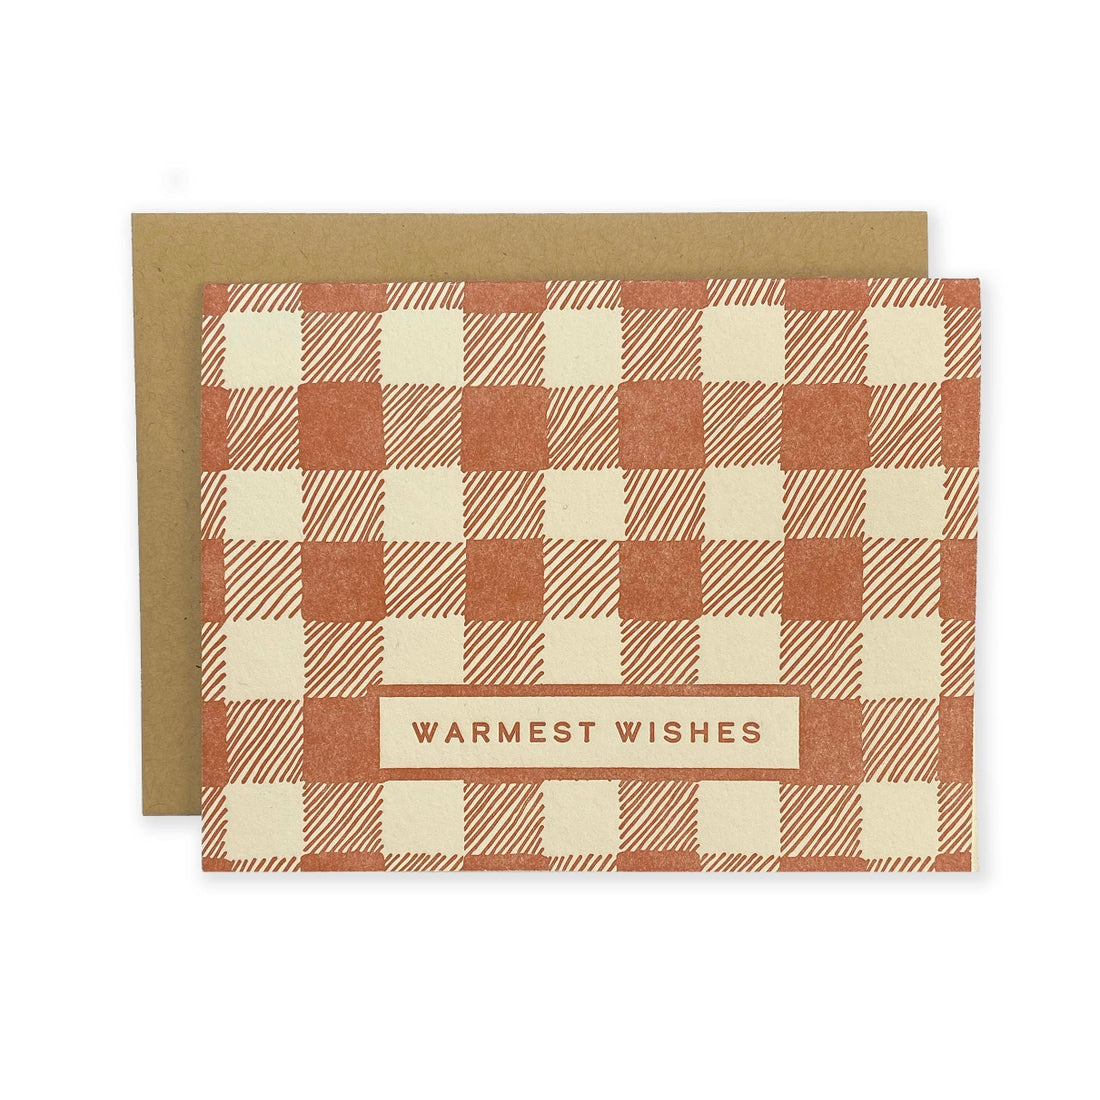 Warmest Wishes Greeting Card